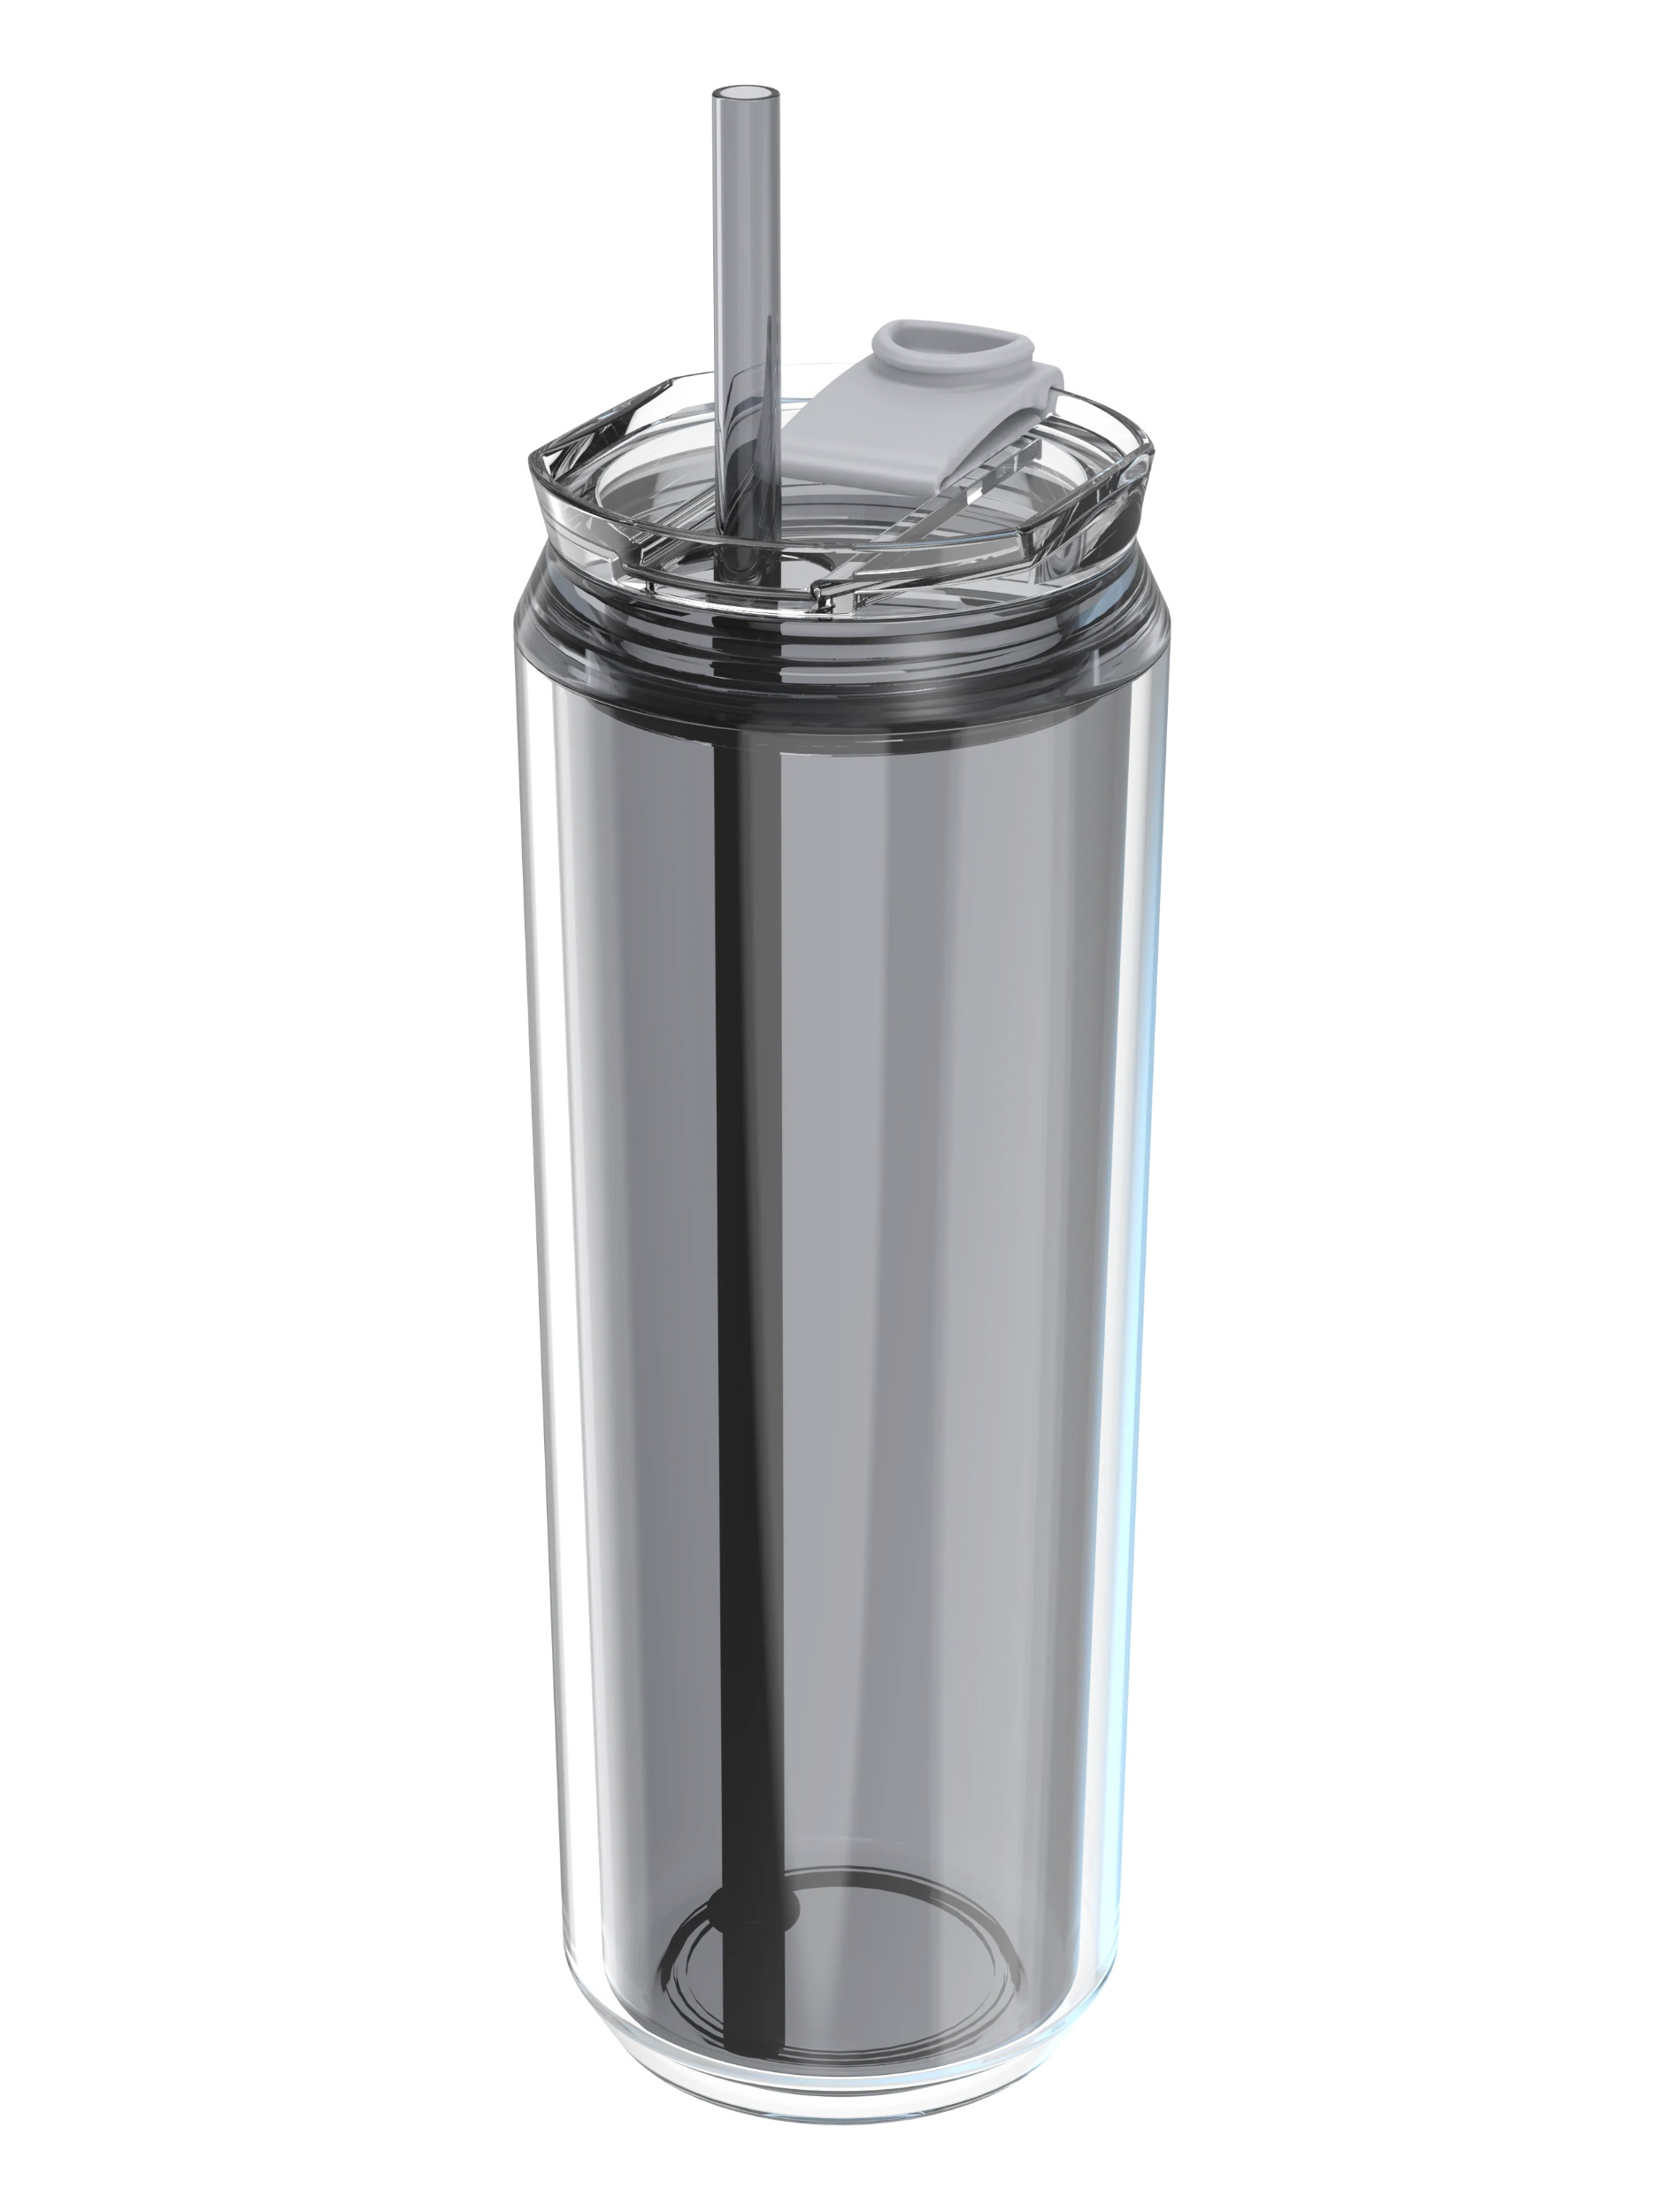 Cool Gear 3-Pack Modern Tumbler with Reusable Straw | Dishwasher Safe, Cup Holder Friendly, Spillproof, Double-Wall Insulated Travel Tumbler | Solid Cool Grey Pack - image 2 of 2